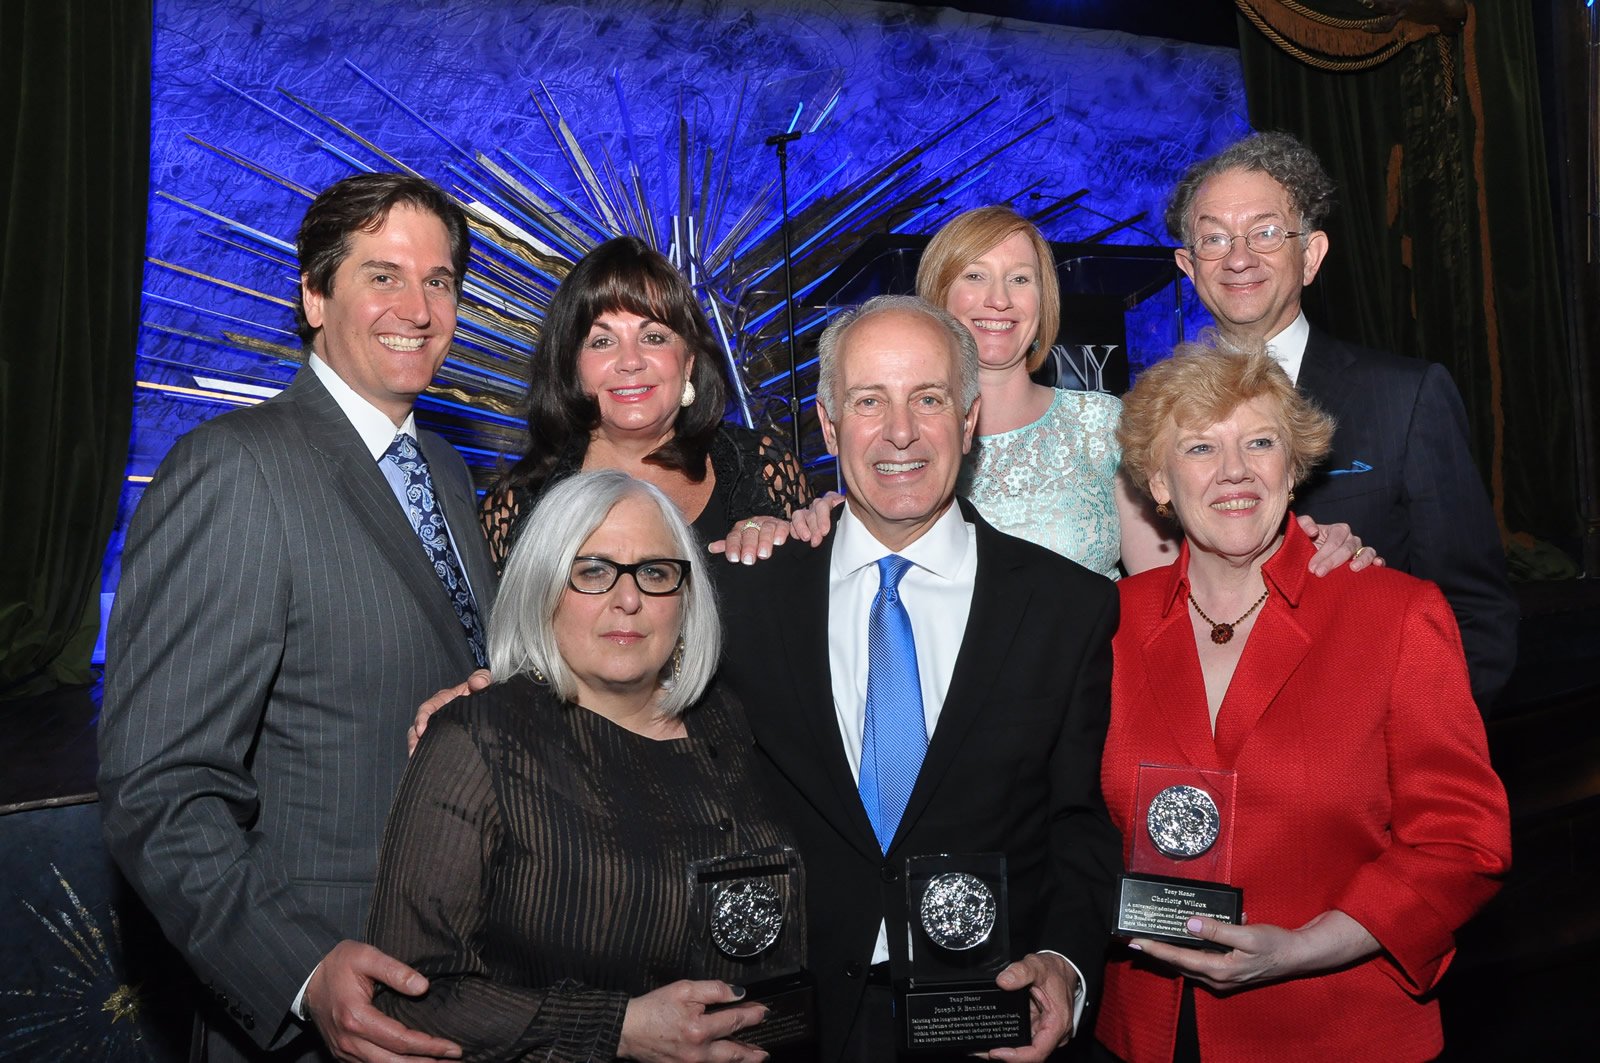 The Broadway League's Nick Scandalios and Charlotte St. Martin, The Wing's Heather Hitchens and William Ivey Long w/Joe Benincasa, Joan Marcus, and Charlotte Wilcox